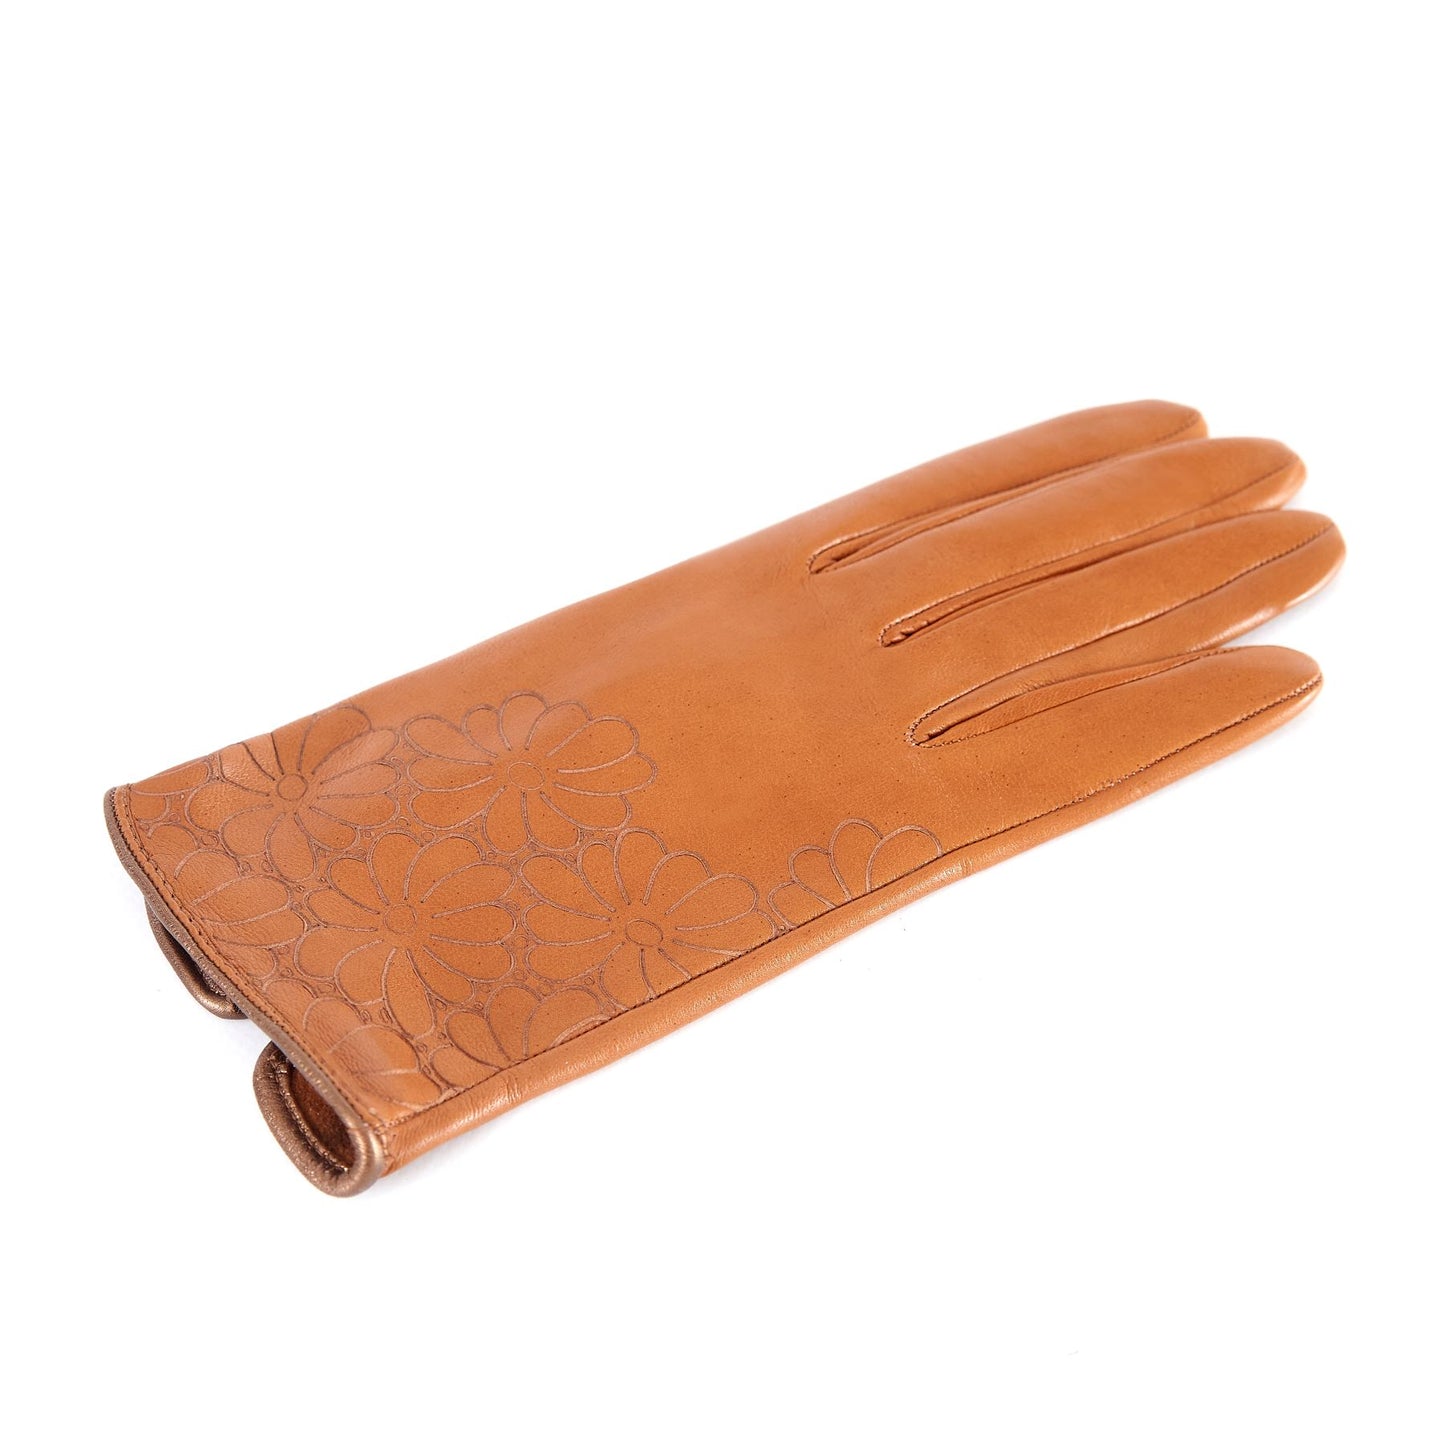 Women's unlined camel nappa leather gloves with floral detail